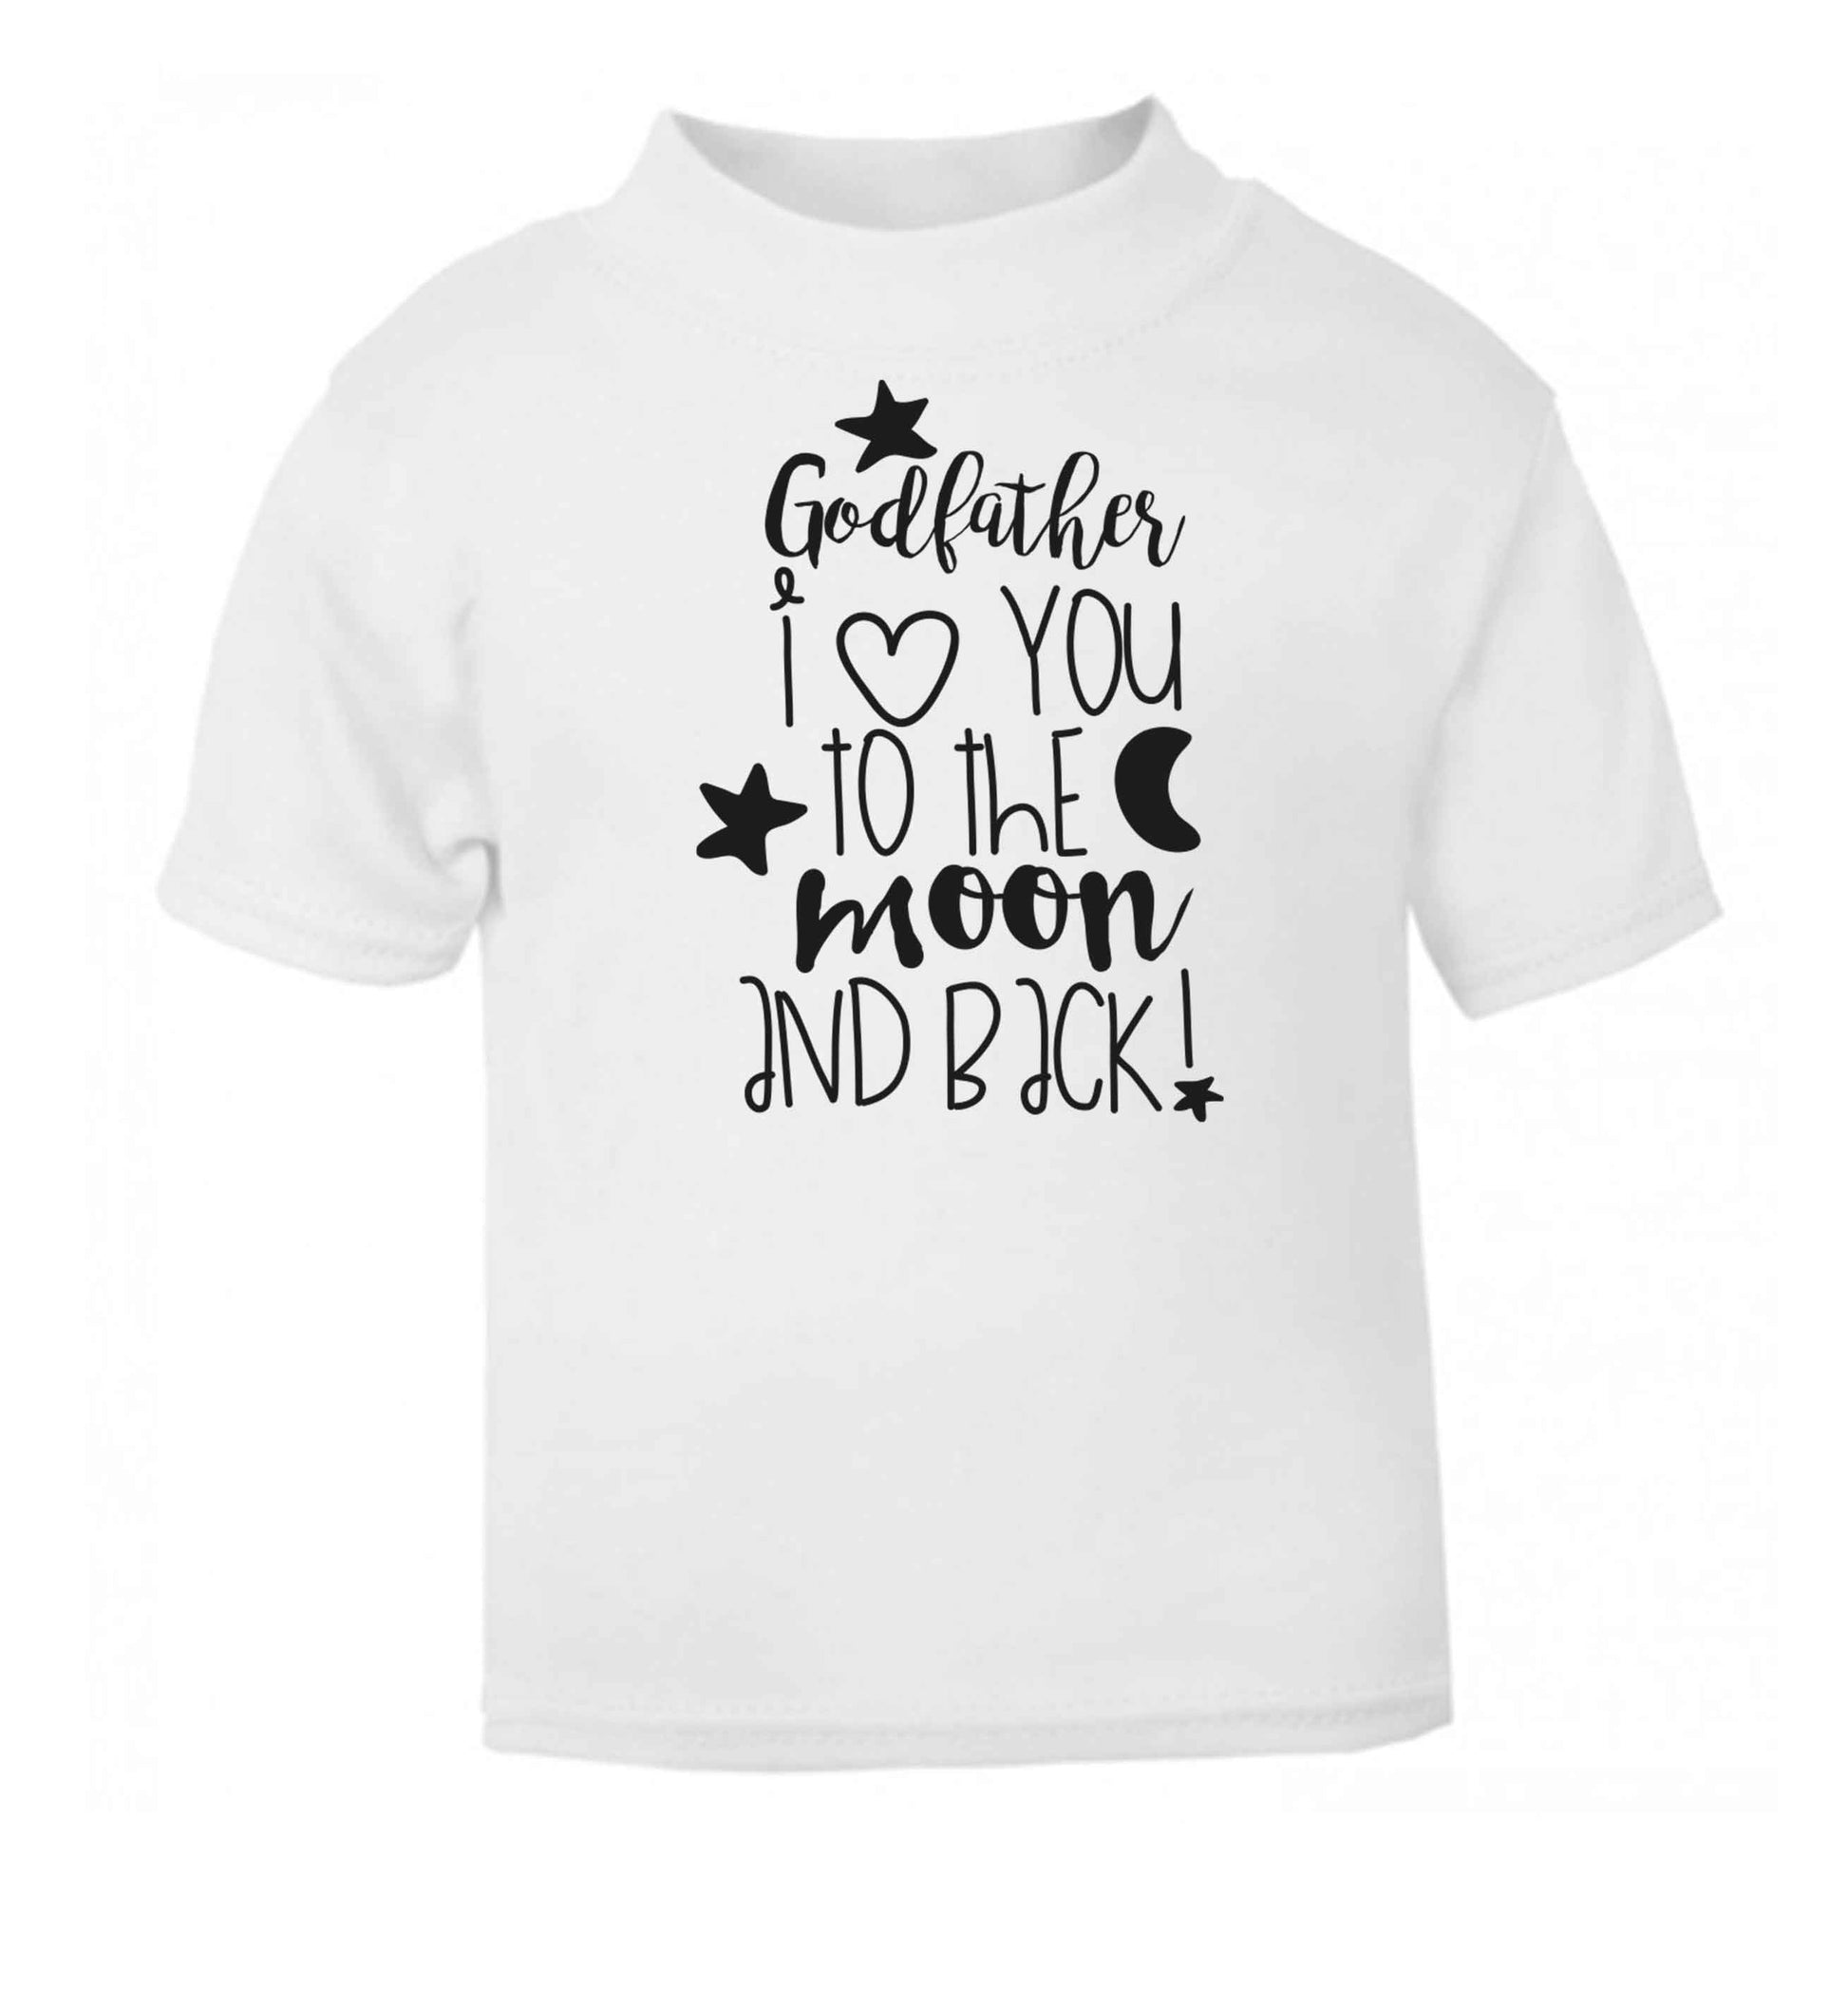 Godfather I love you to the moon and back white baby toddler Tshirt 2 Years